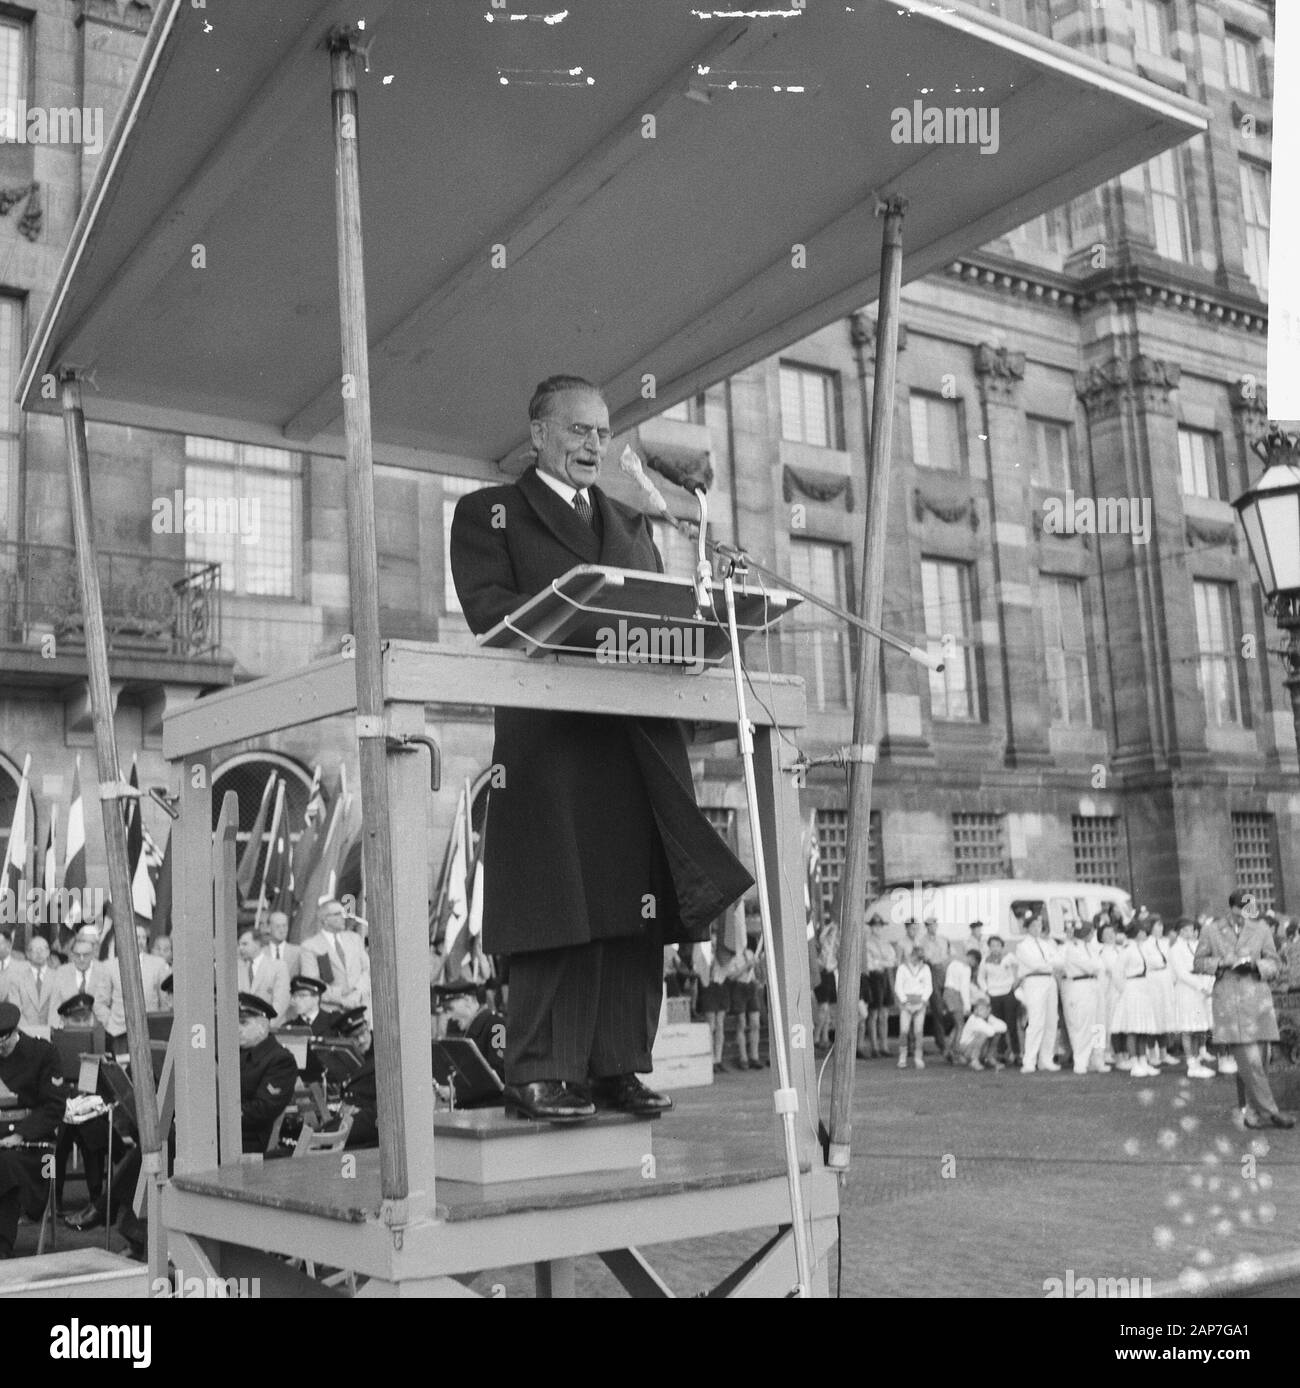 United Nations Day in Amsterdam. Dr. Willem Drees during speech Date: 29 October 1961 Location: Amsterdam, Noord-Holland Keywords: Speeches Personal name: Day of the United Nations, Dr. Willem Drees Stock Photo